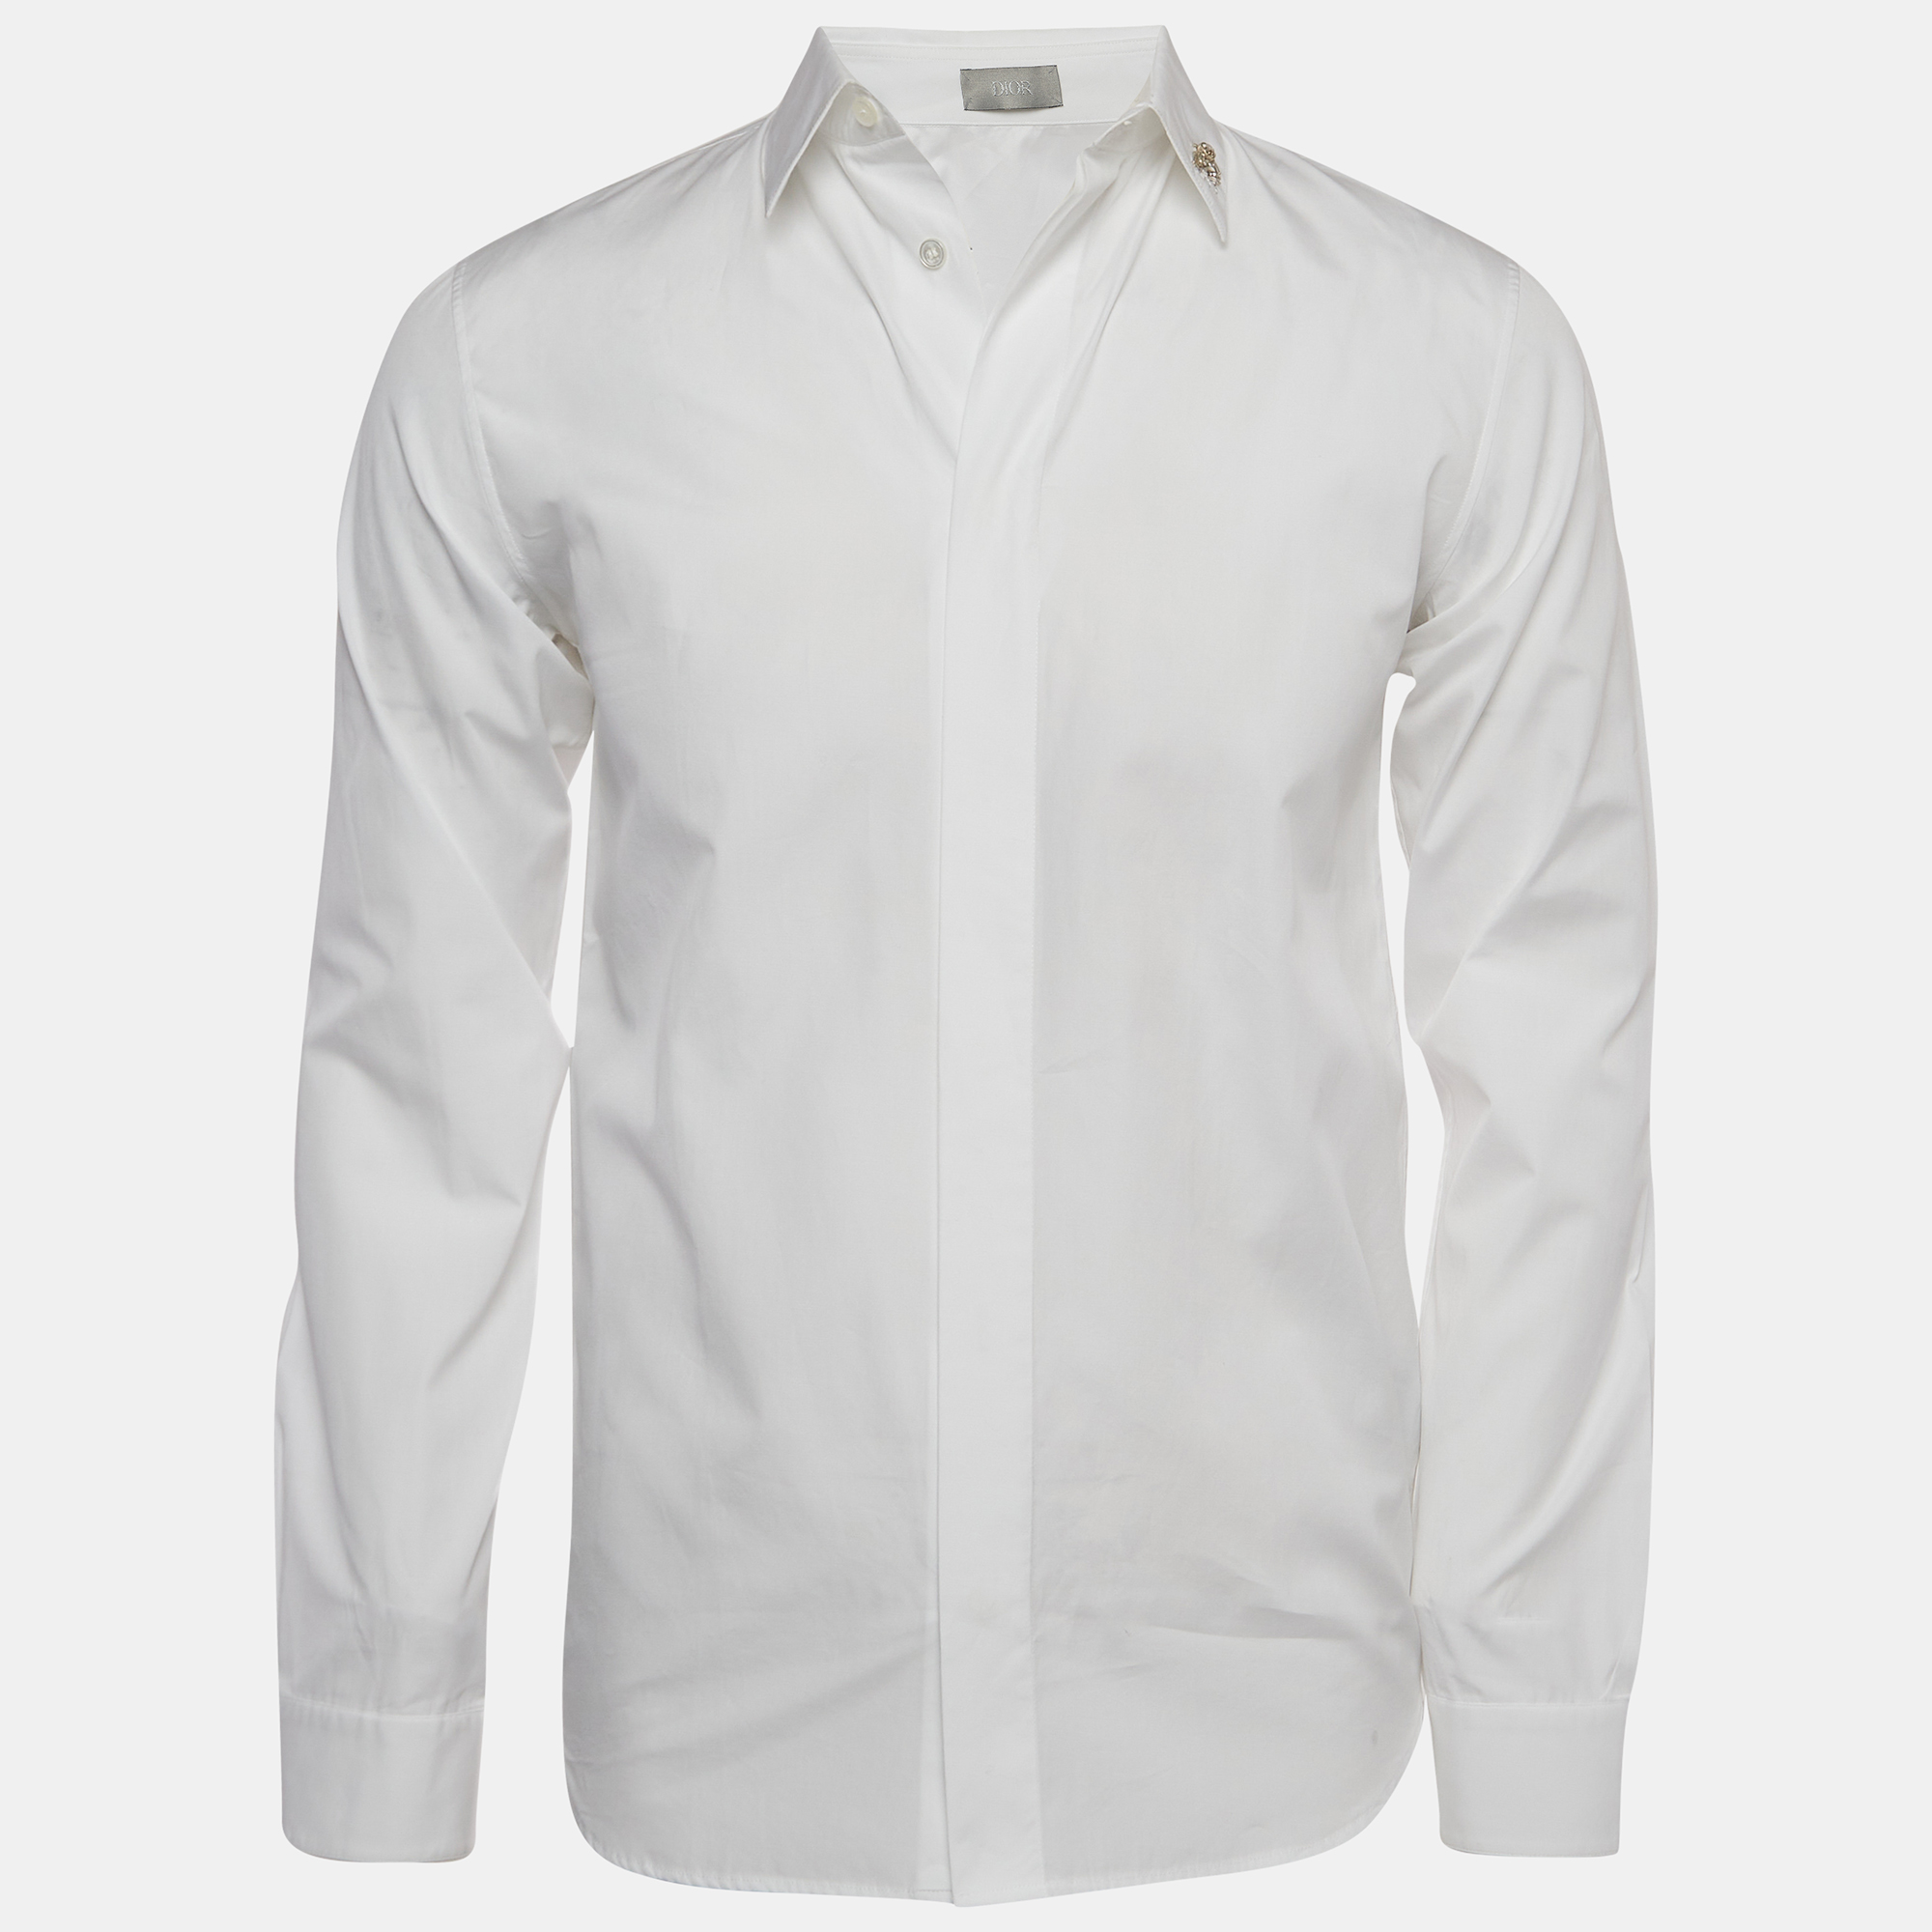 Dior Homme White Cotton Bee Embellished Long Sleeve Shirt XS